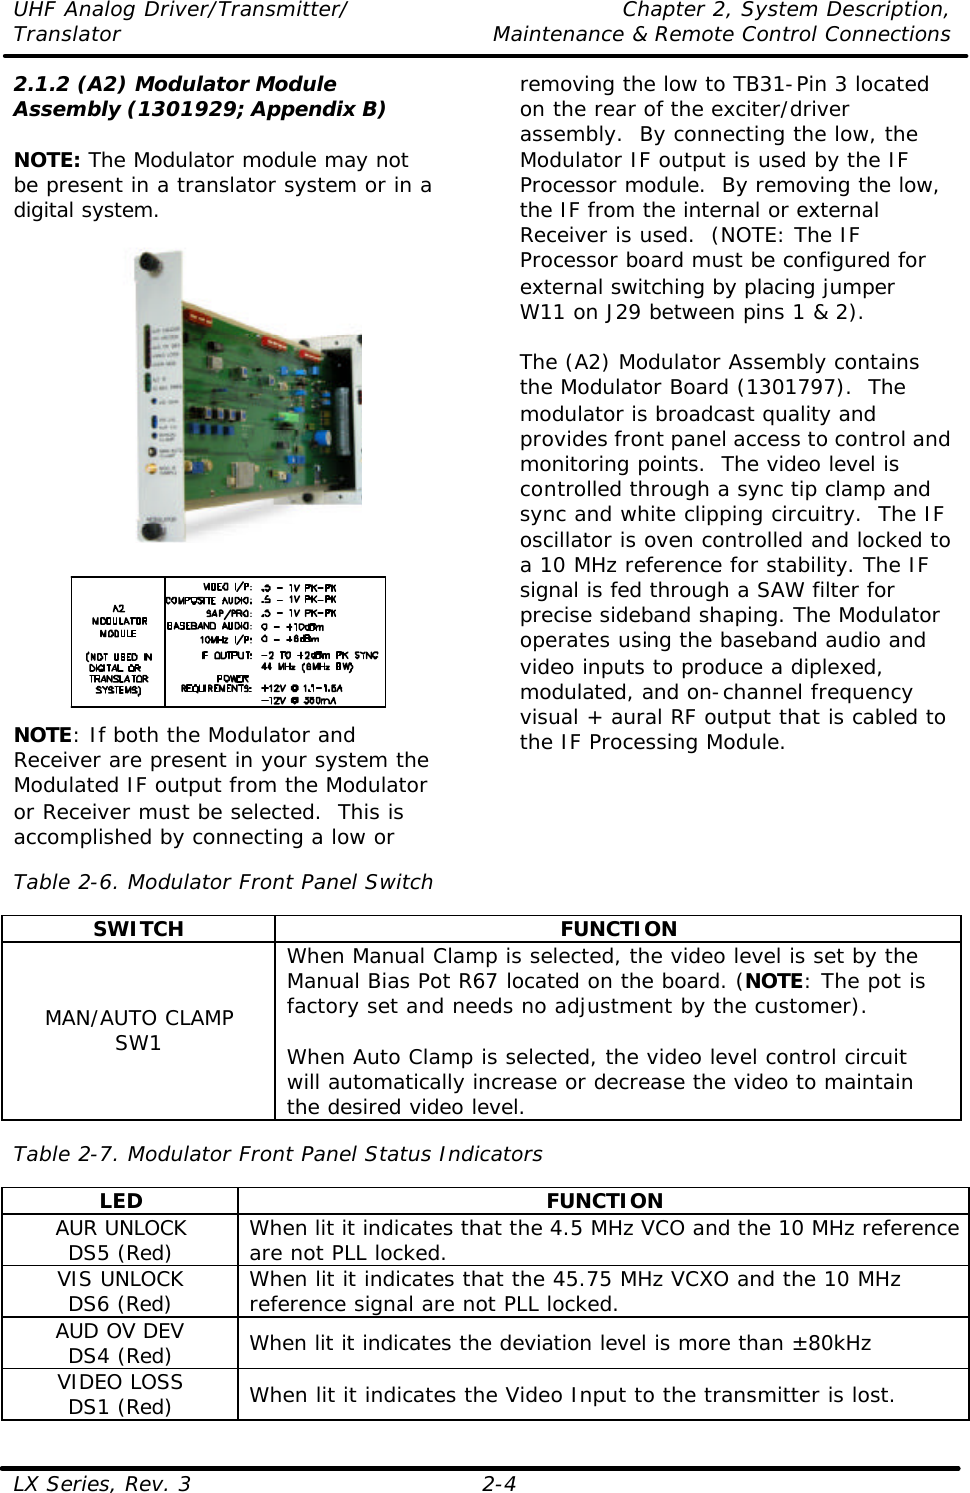 UHF Analog Driver/Transmitter/ Chapter 2, System Description, Translator Maintenance &amp; Remote Control Connections LX Series, Rev. 3 2-4 2.1.2 (A2) Modulator Module Assembly (1301929; Appendix B)  NOTE: The Modulator module may not be present in a translator system or in a digital system.     NOTE: If both the Modulator and Receiver are present in your system the Modulated IF output from the Modulator or Receiver must be selected.  This is accomplished by connecting a low or removing the low to TB31-Pin 3 located on the rear of the exciter/driver assembly.  By connecting the low, the Modulator IF output is used by the IF Processor module.  By removing the low, the IF from the internal or external Receiver is used.  (NOTE: The IF Processor board must be configured for external switching by placing jumper W11 on J29 between pins 1 &amp; 2).  The (A2) Modulator Assembly contains the Modulator Board (1301797).  The modulator is broadcast quality and provides front panel access to control and monitoring points.  The video level is controlled through a sync tip clamp and sync and white clipping circuitry.  The IF oscillator is oven controlled and locked to a 10 MHz reference for stability. The IF signal is fed through a SAW filter for precise sideband shaping. The Modulator operates using the baseband audio and video inputs to produce a diplexed, modulated, and on-channel frequency visual + aural RF output that is cabled to the IF Processing Module.   Table 2-6. Modulator Front Panel Switch  SWITCH FUNCTION MAN/AUTO CLAMP SW1 When Manual Clamp is selected, the video level is set by the Manual Bias Pot R67 located on the board. (NOTE: The pot is factory set and needs no adjustment by the customer).  When Auto Clamp is selected, the video level control circuit will automatically increase or decrease the video to maintain the desired video level.  Table 2-7. Modulator Front Panel Status Indicators  LED FUNCTION AUR UNLOCK DS5 (Red) When lit it indicates that the 4.5 MHz VCO and the 10 MHz reference are not PLL locked. VIS UNLOCK DS6 (Red) When lit it indicates that the 45.75 MHz VCXO and the 10 MHz reference signal are not PLL locked. AUD OV DEV DS4 (Red) When lit it indicates the deviation level is more than ±80kHz VIDEO LOSS DS1 (Red) When lit it indicates the Video Input to the transmitter is lost. 